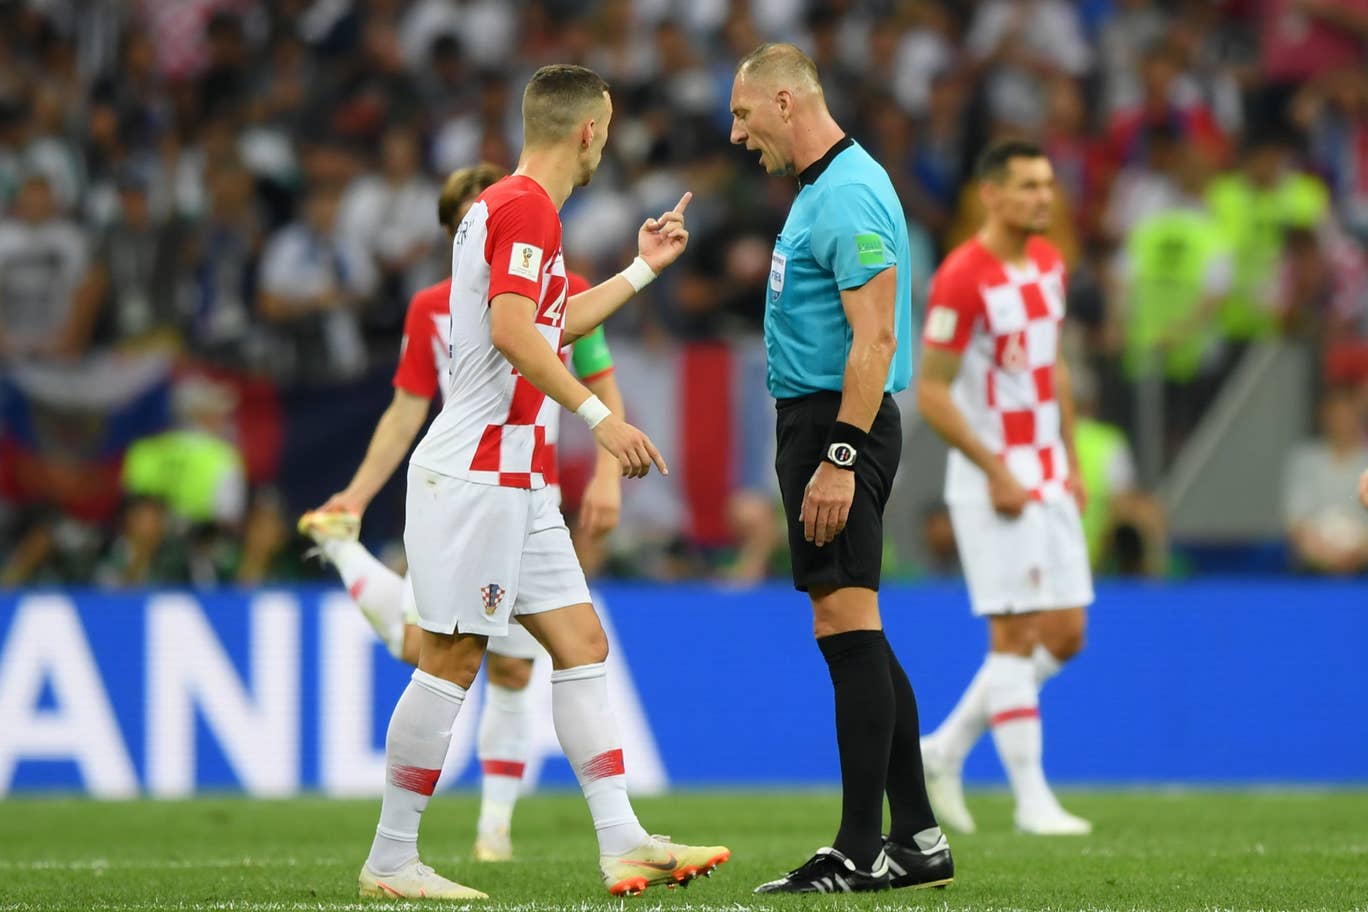 https://static.independent.co.uk/s3fs-public/thumbnails/image/2018/07/15/17/WORLD-CUP-FINAL-36.jpg?width=1368&height=912&fit=bounds&format=pjpg&auto=webp&quality=70